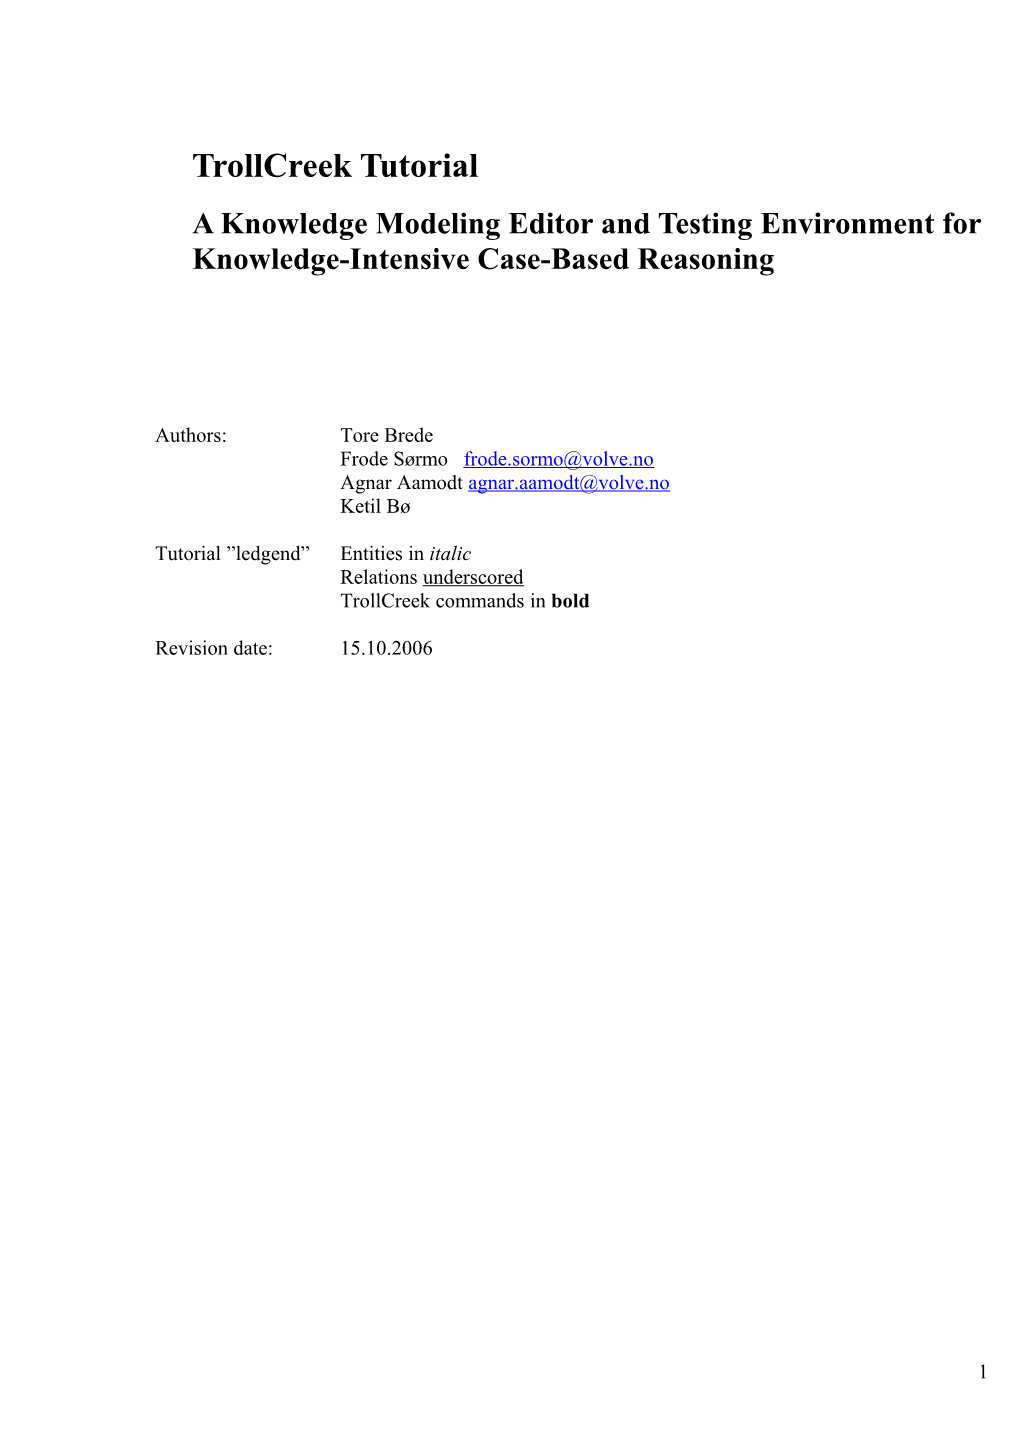 A Knowledge Modeling Editor and Testing Environment for Knowledge-Intensive Case-Based Reasoning